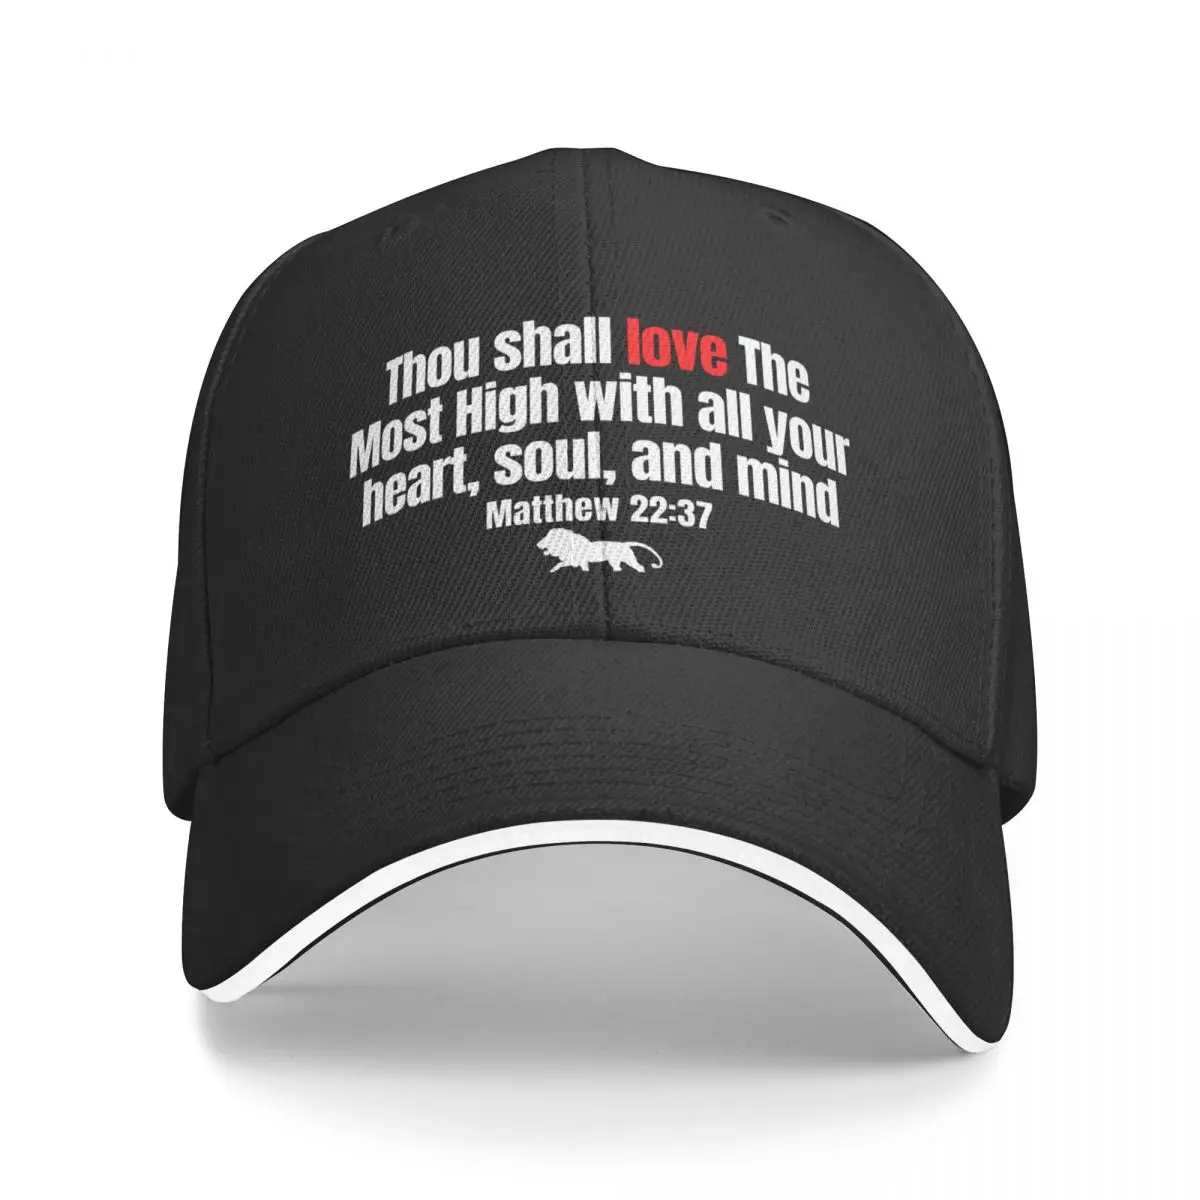 

New Thou Shall Love The Most High With All Your Heart, Soul, and Mind Baseball Cap Sunhat Women Hat Men's